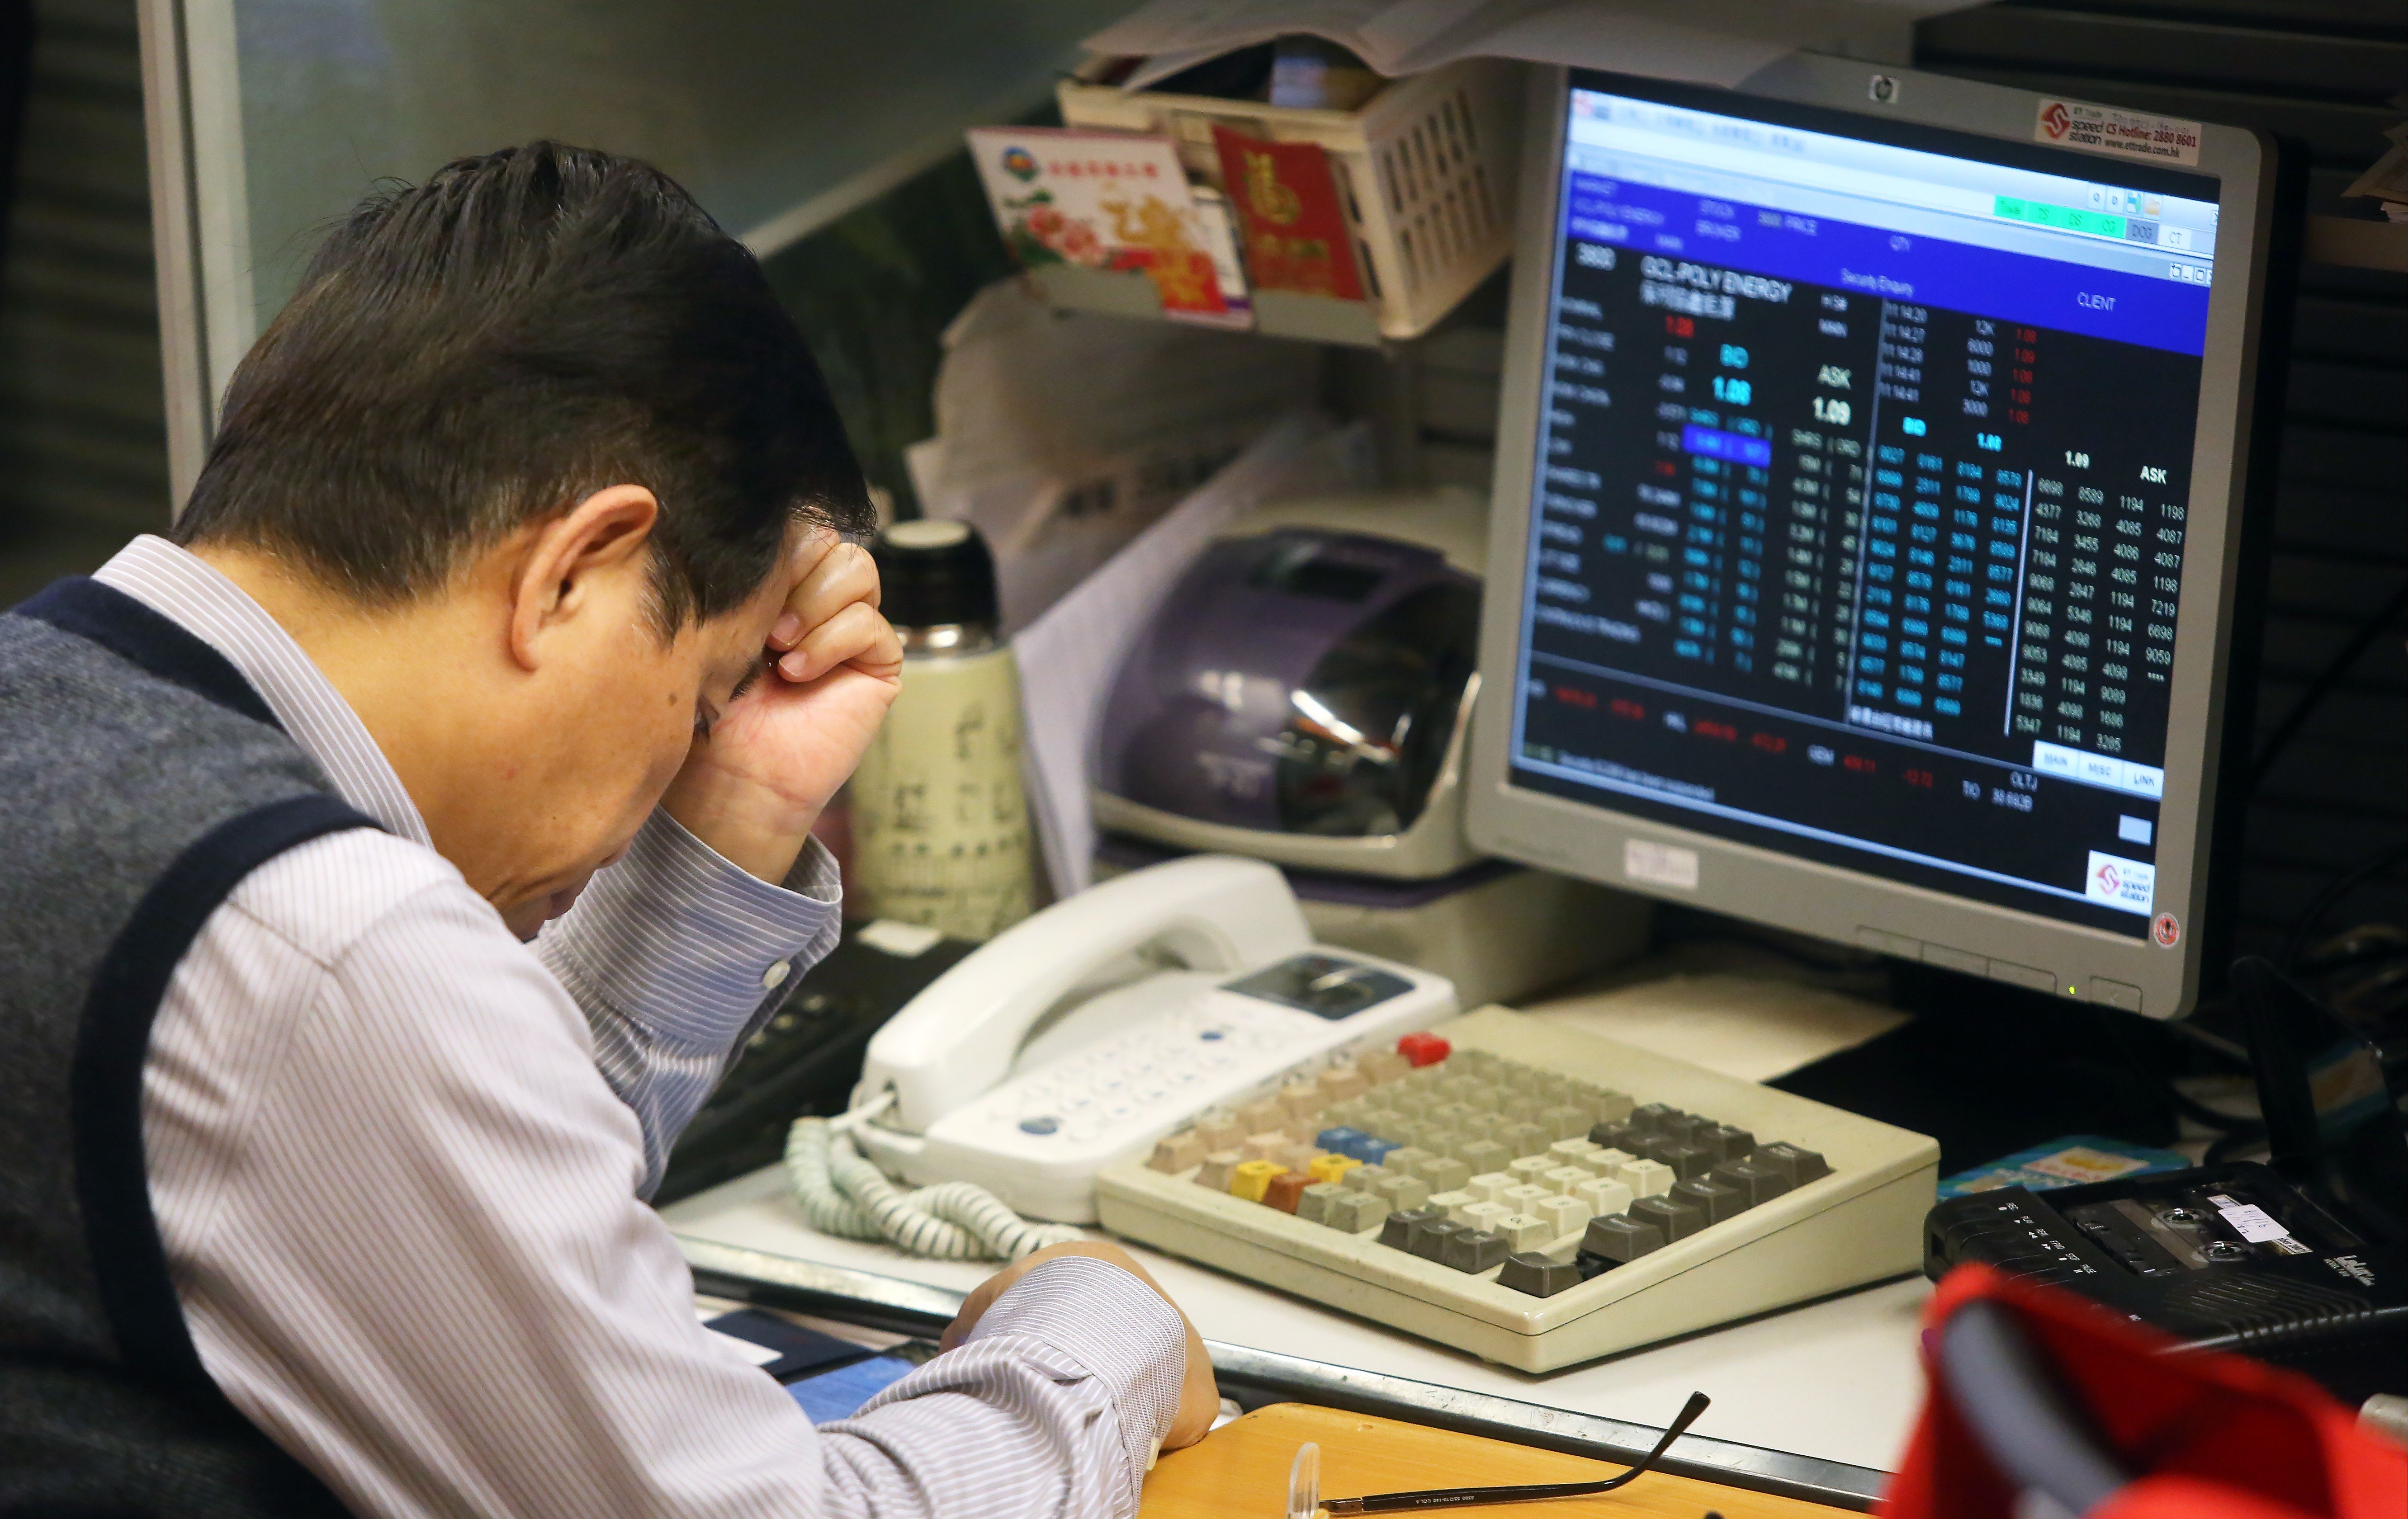 Floor traders are seen at the Hong Kong stock exchange in Central. Photo: Sam Tsang